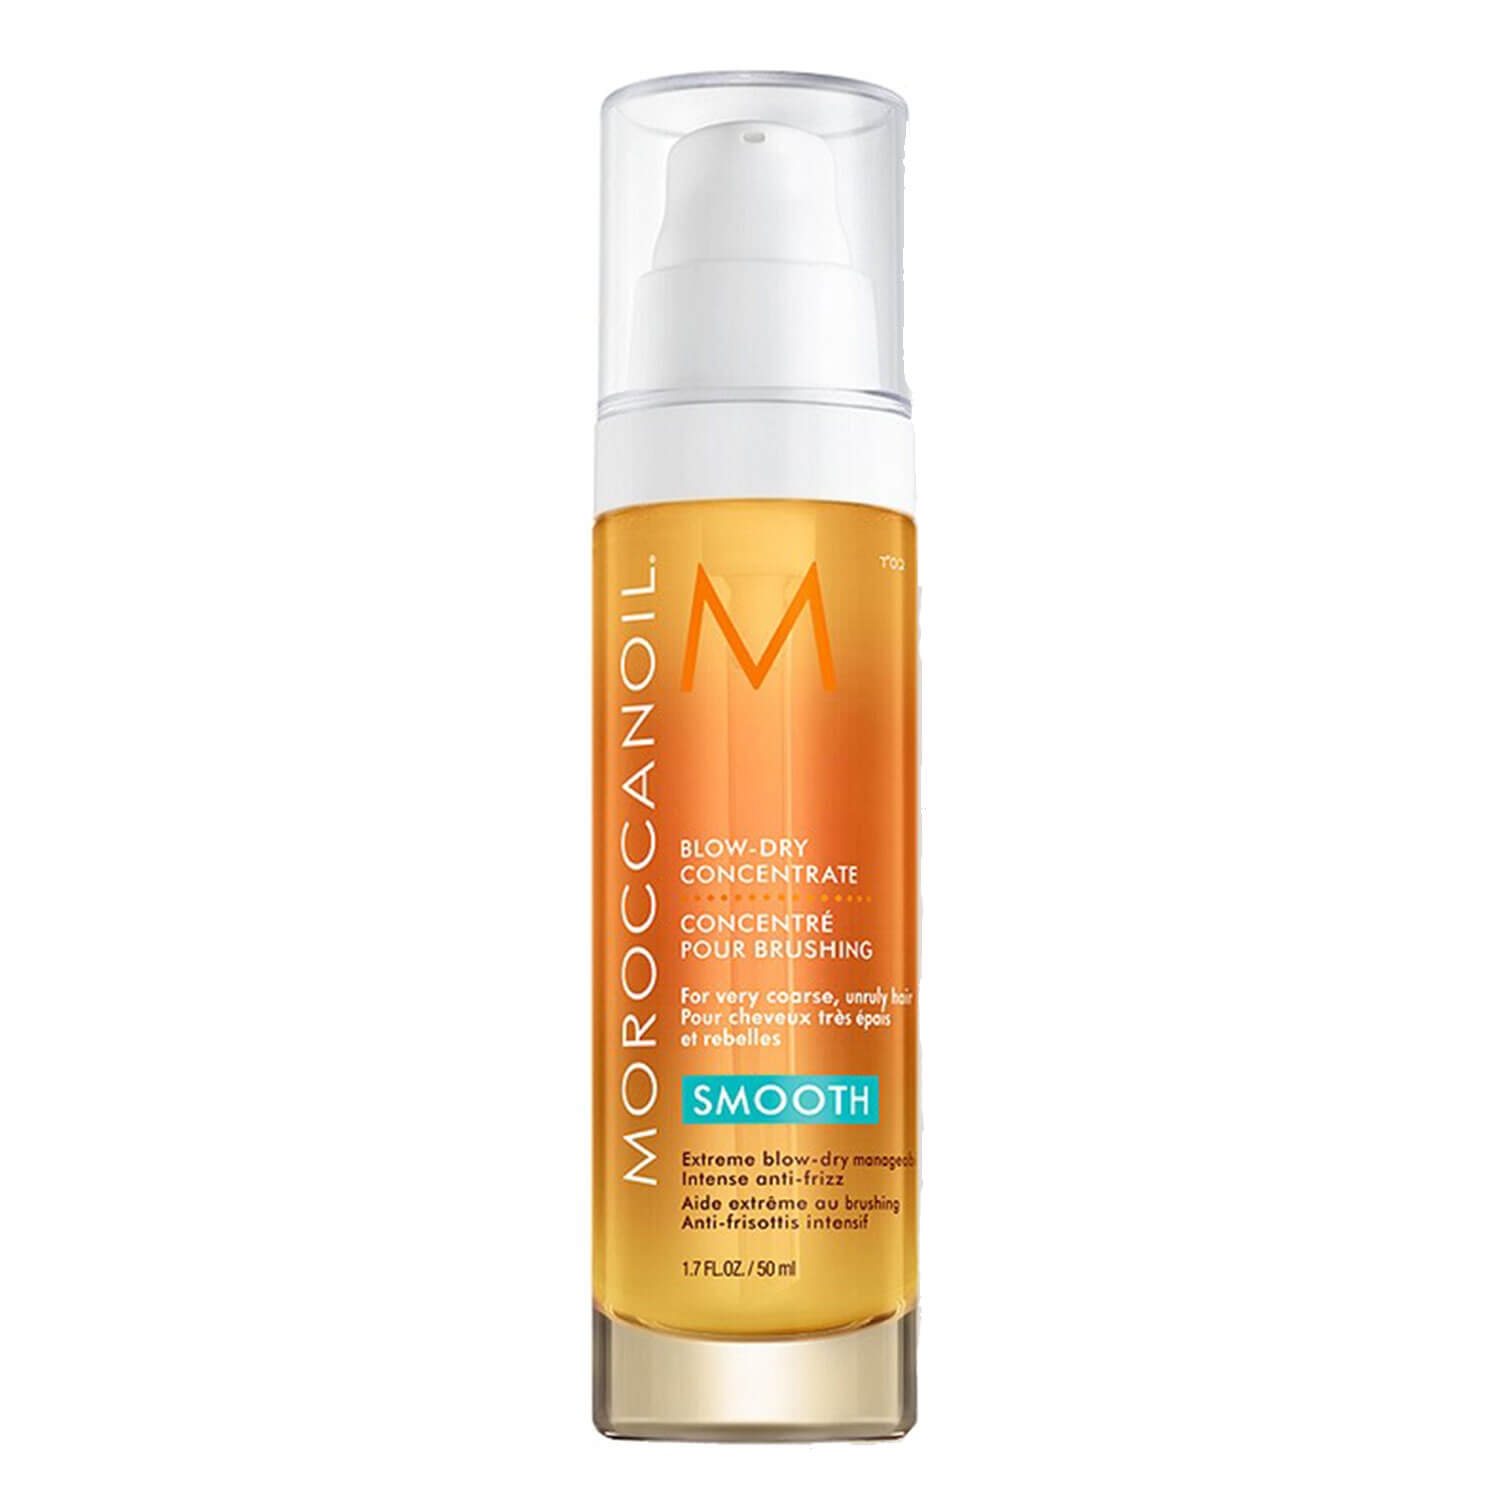 Product image from Moroccanoil - Blow-dry Concentrate